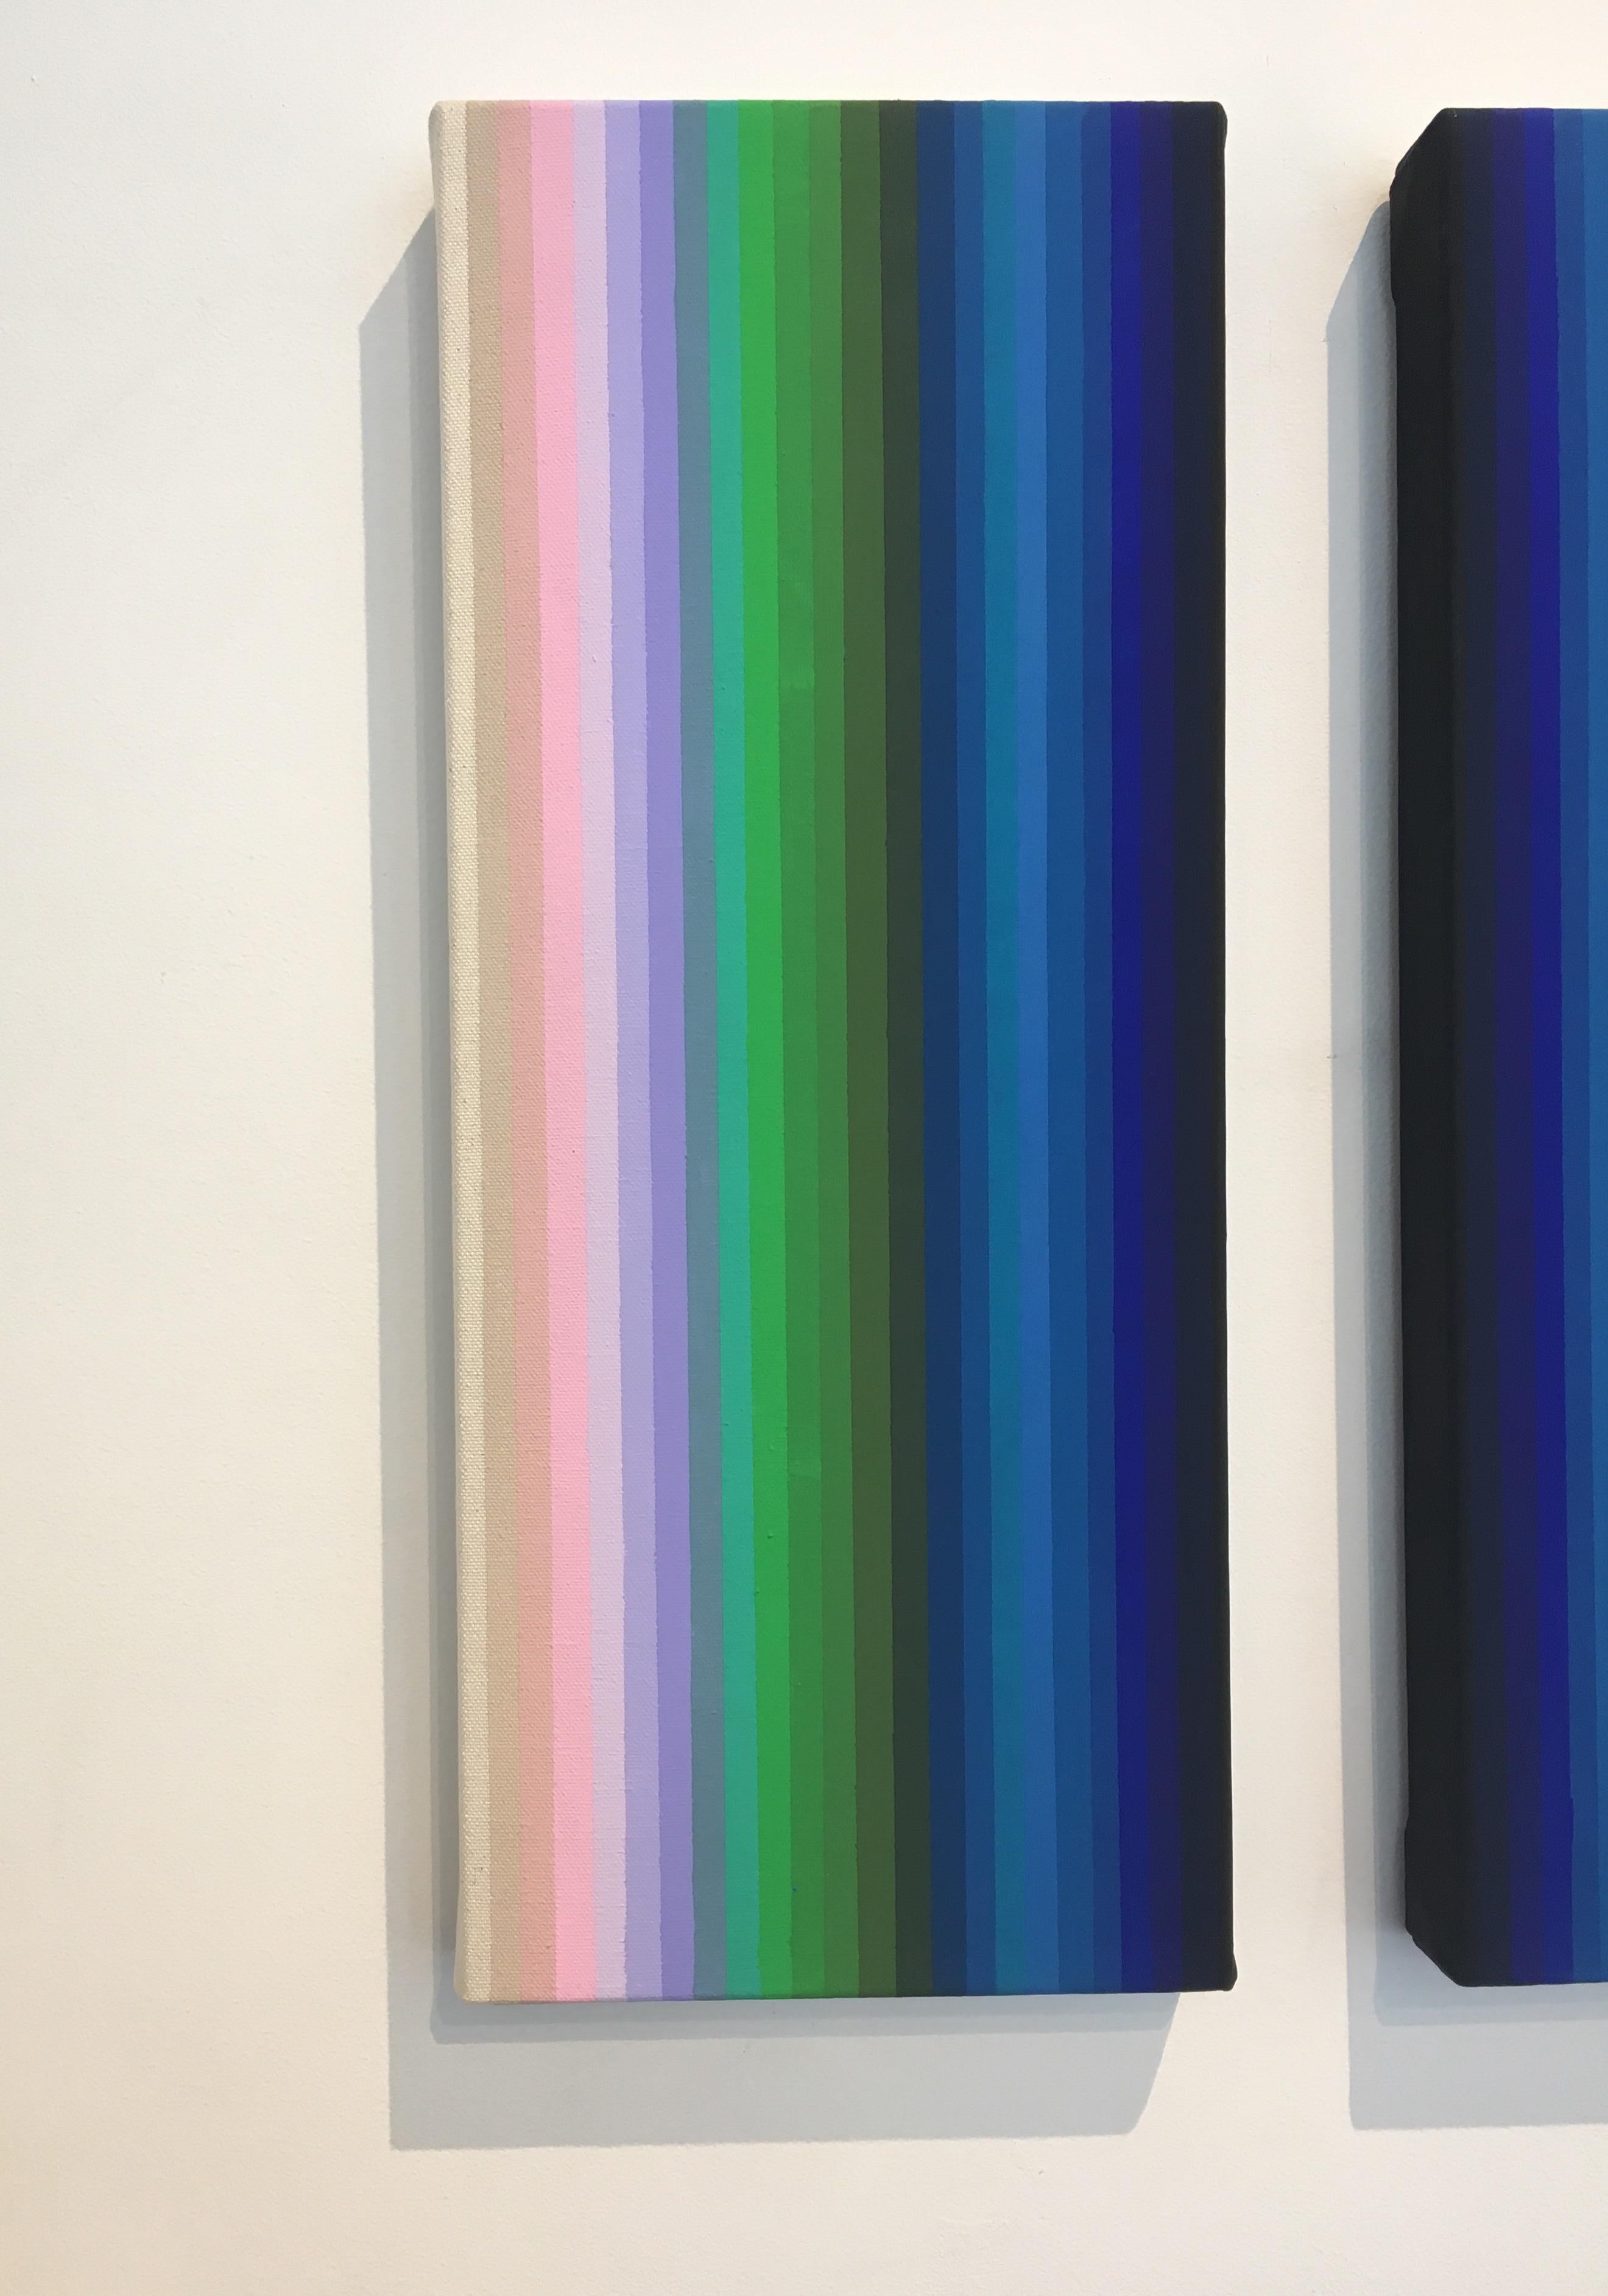 In this abstract diptych, meticulously ordered vertical stripes of gradient color transition symmetrically from beige at the edges to pale pink, lilac, lavender, green, sage, indigo and a deep dark cobalt blue towards the center of the two